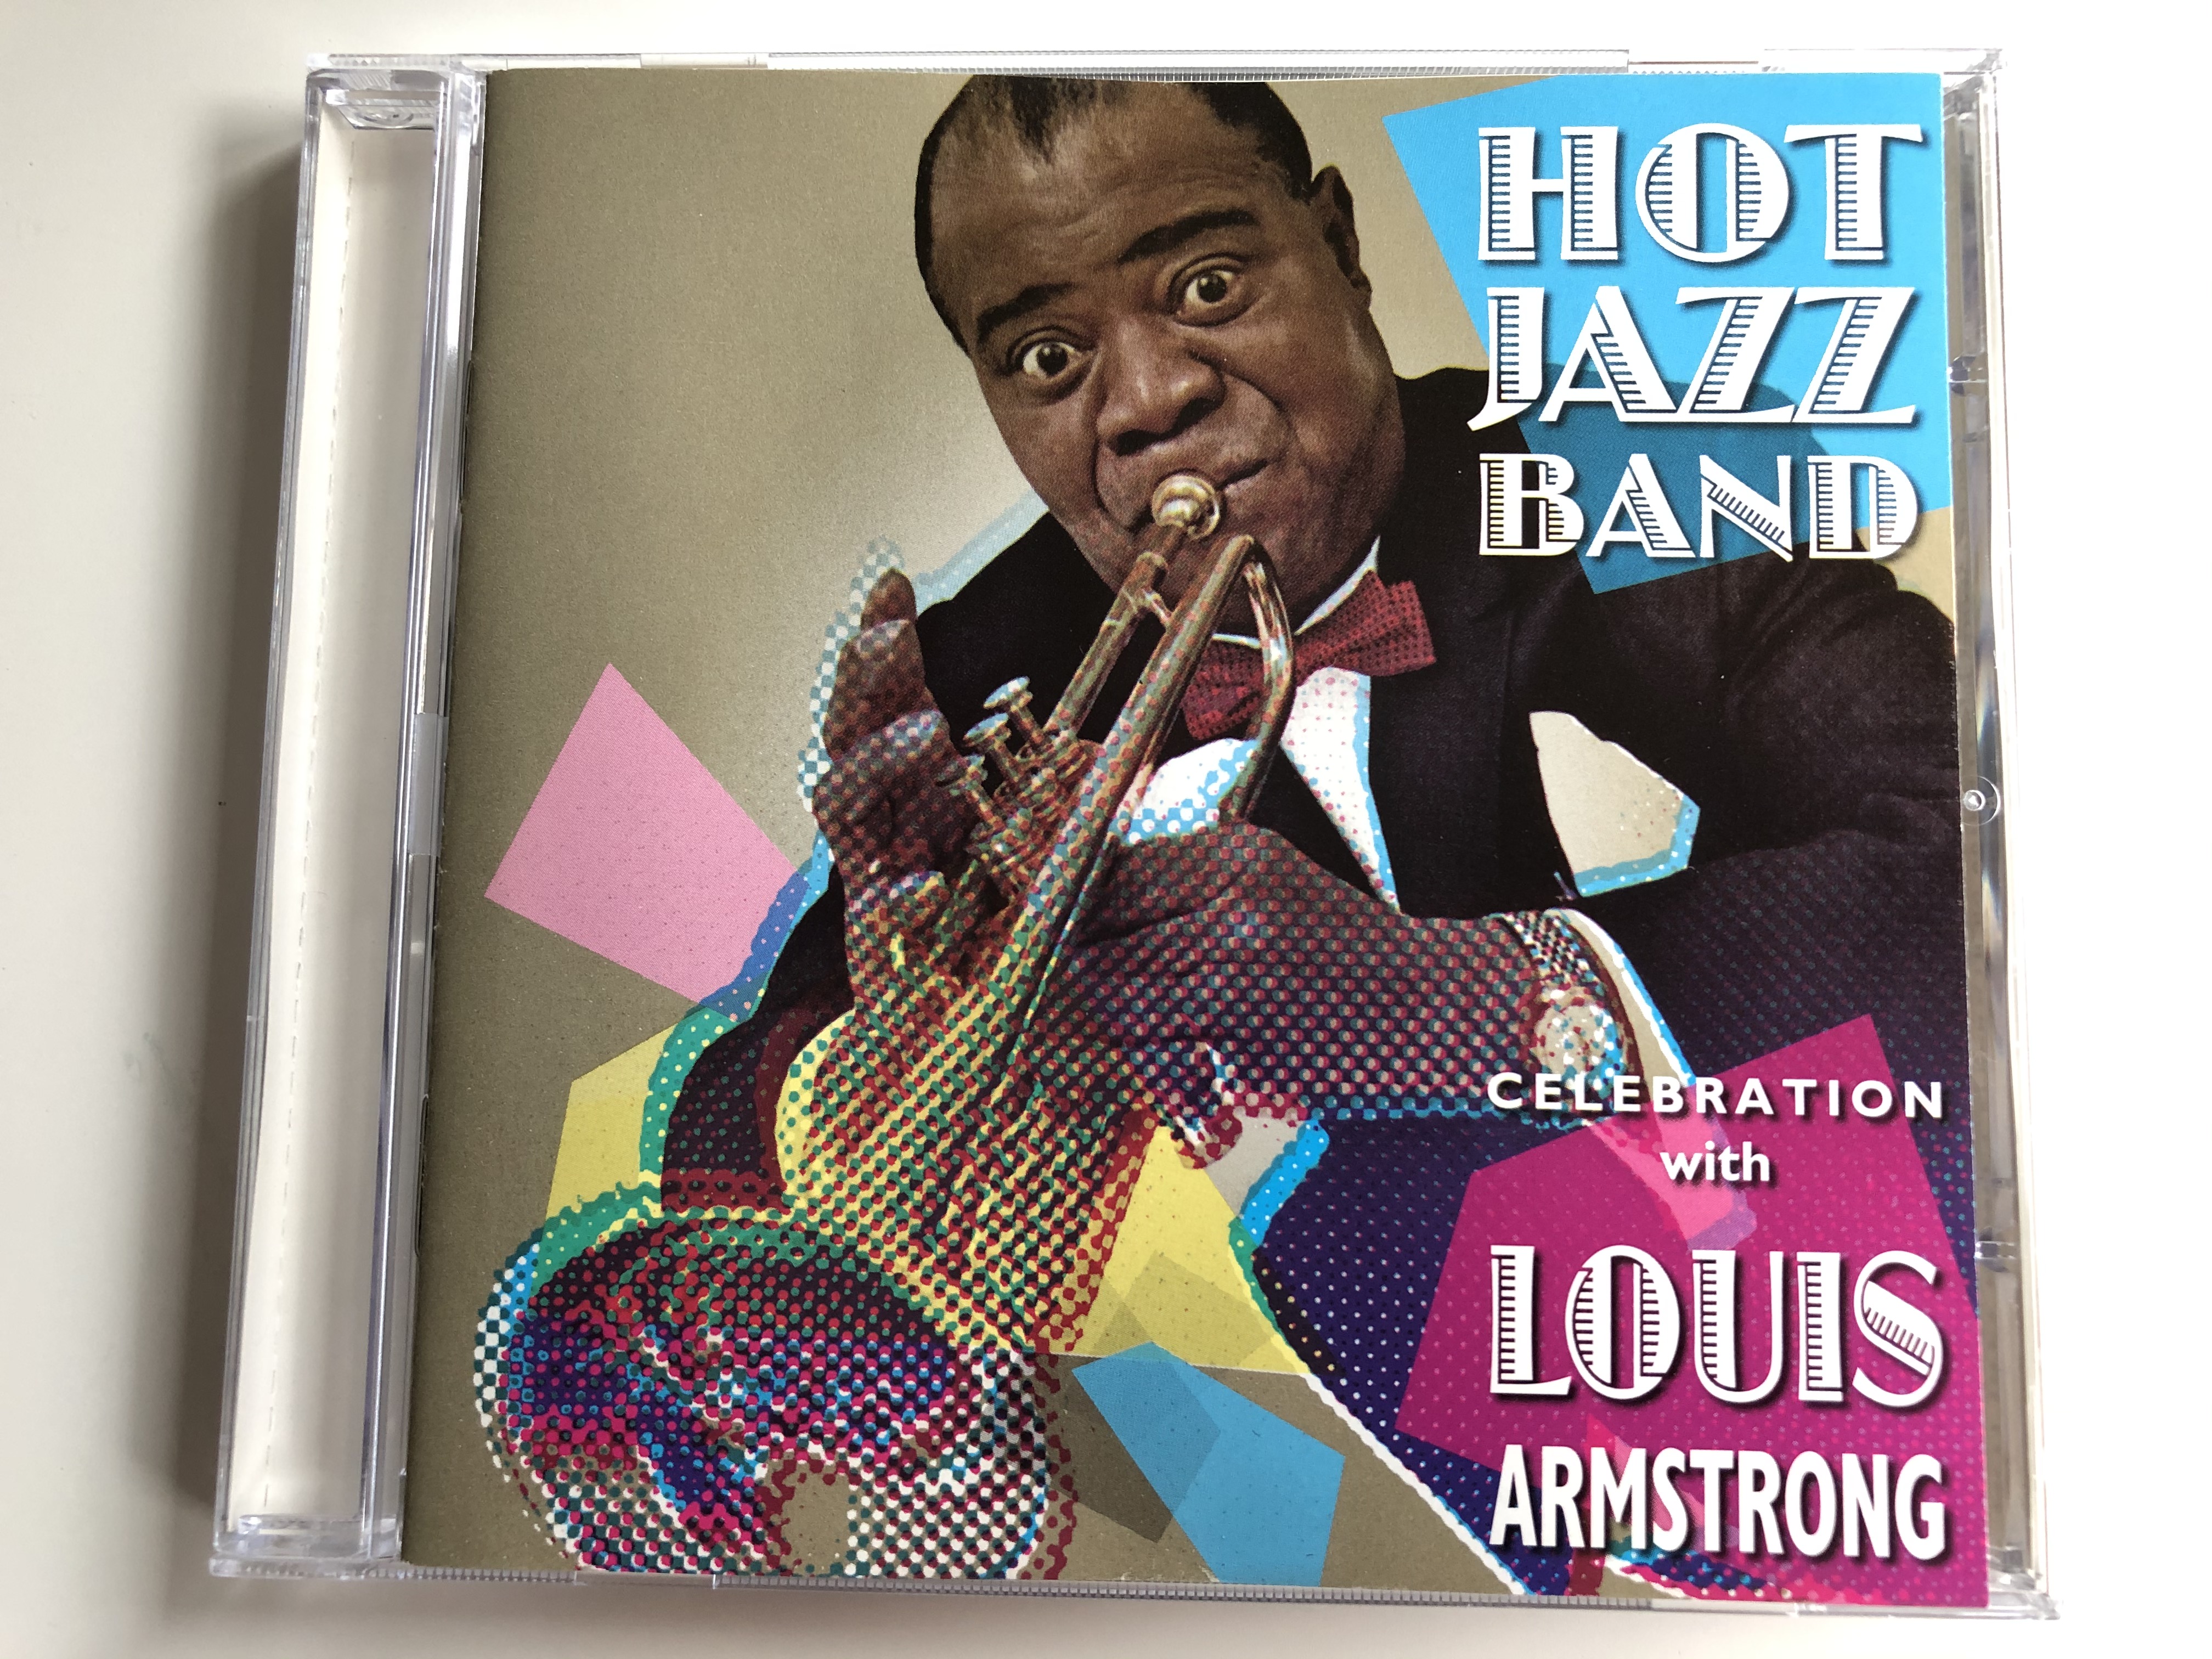 hot-jazz-band-celebration-with-louis-armstrong-hot-jazz-band-audio-cd-2008-hjb-012-1-.jpg